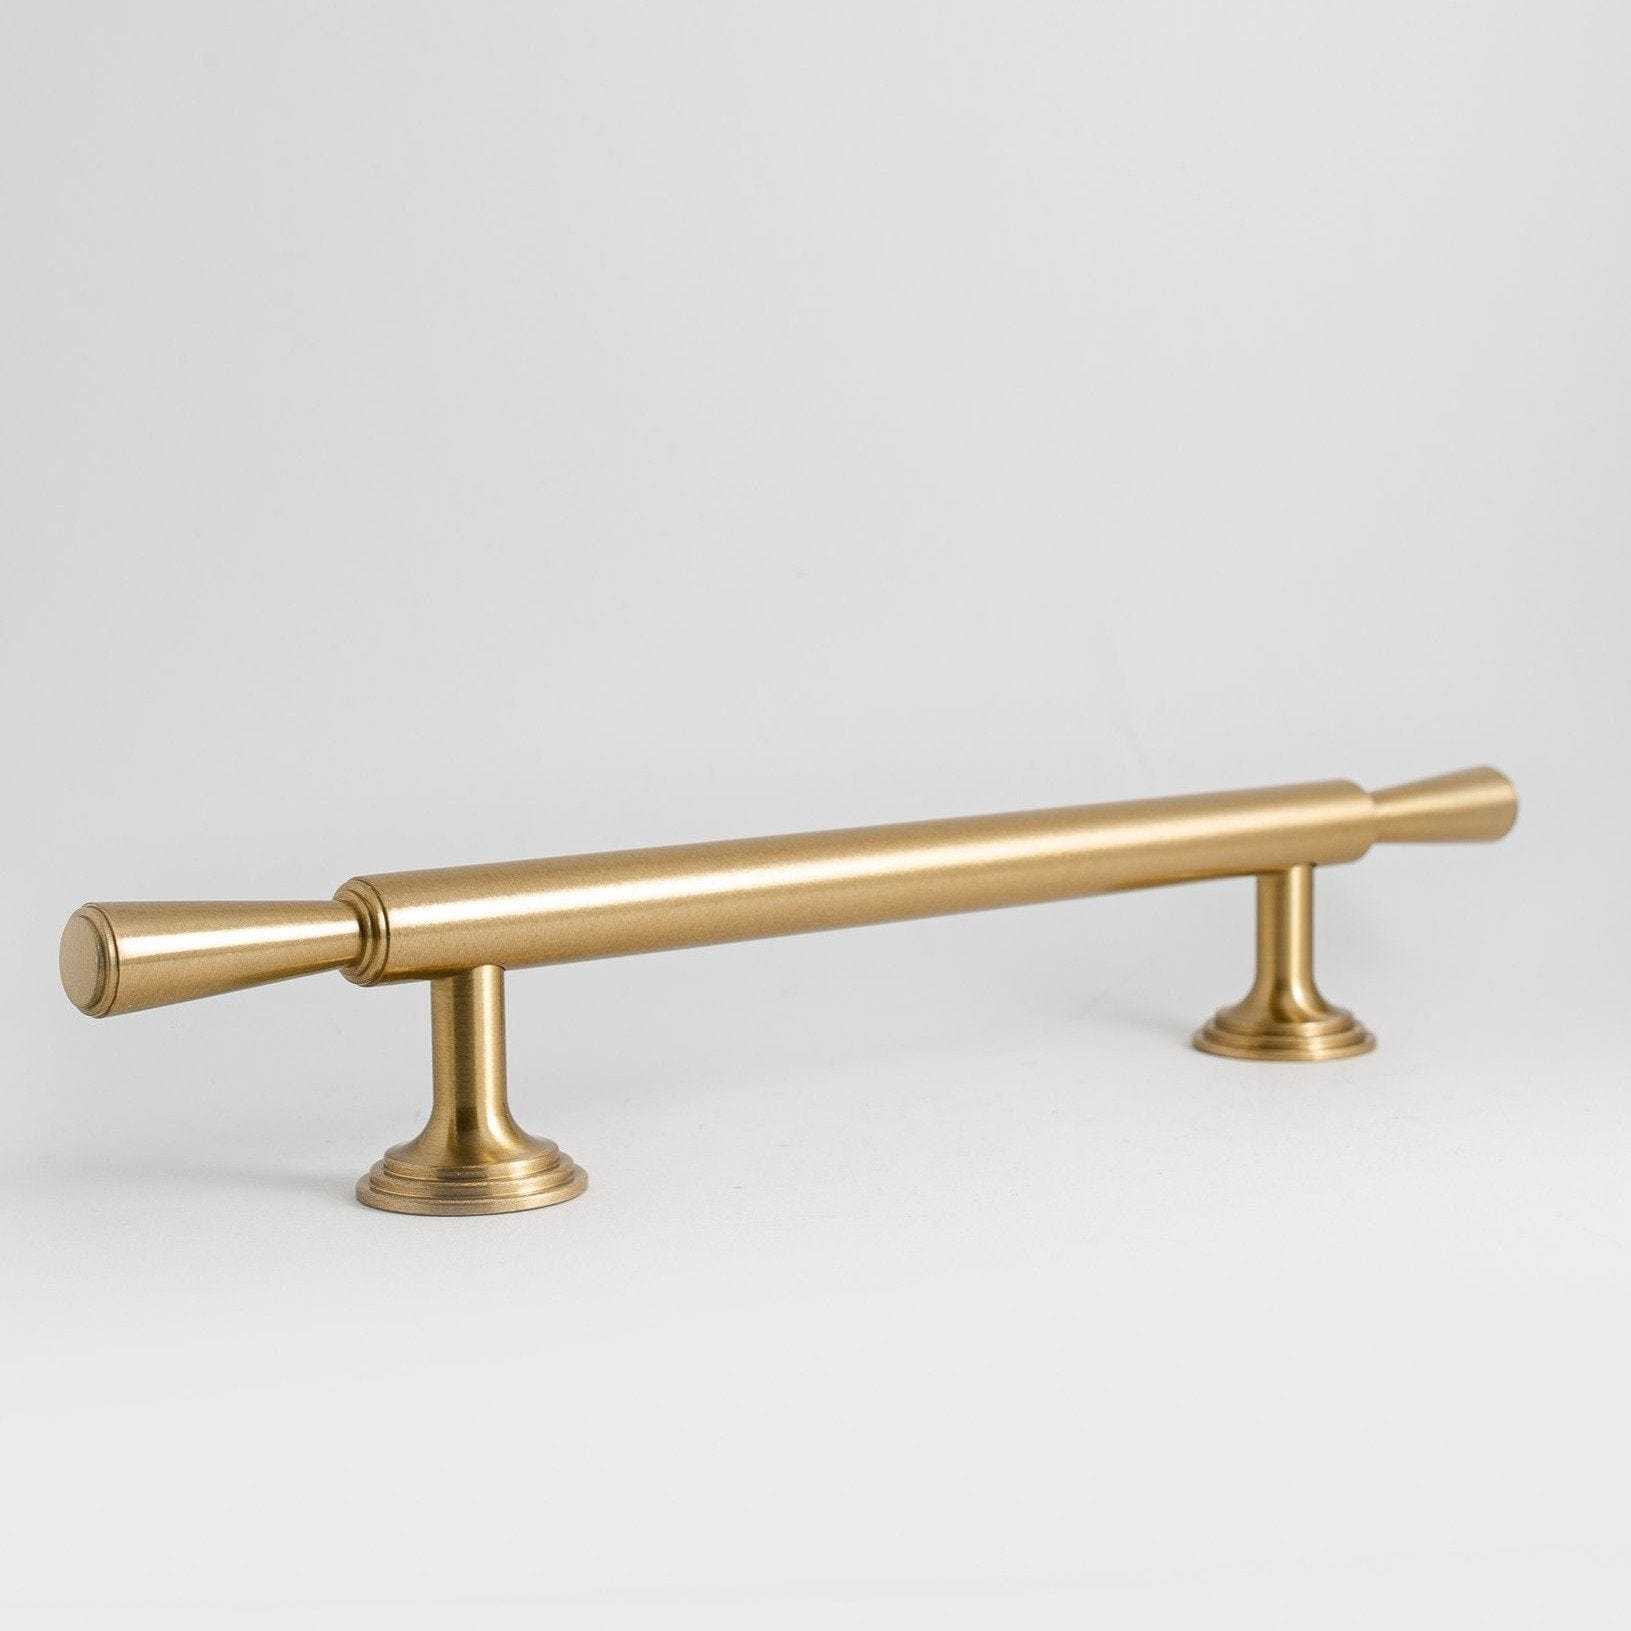 Tuxedo, Solid Brass Appliance Pulls



Meet Tuxedo, our deco-inspired cabinet pull. A sleek, classic design with a modern edge. Its beautiful "stacked" base and tapered ends add visual interest, reminappliance pullTuxedo, Solid Brass Appliance Pulls